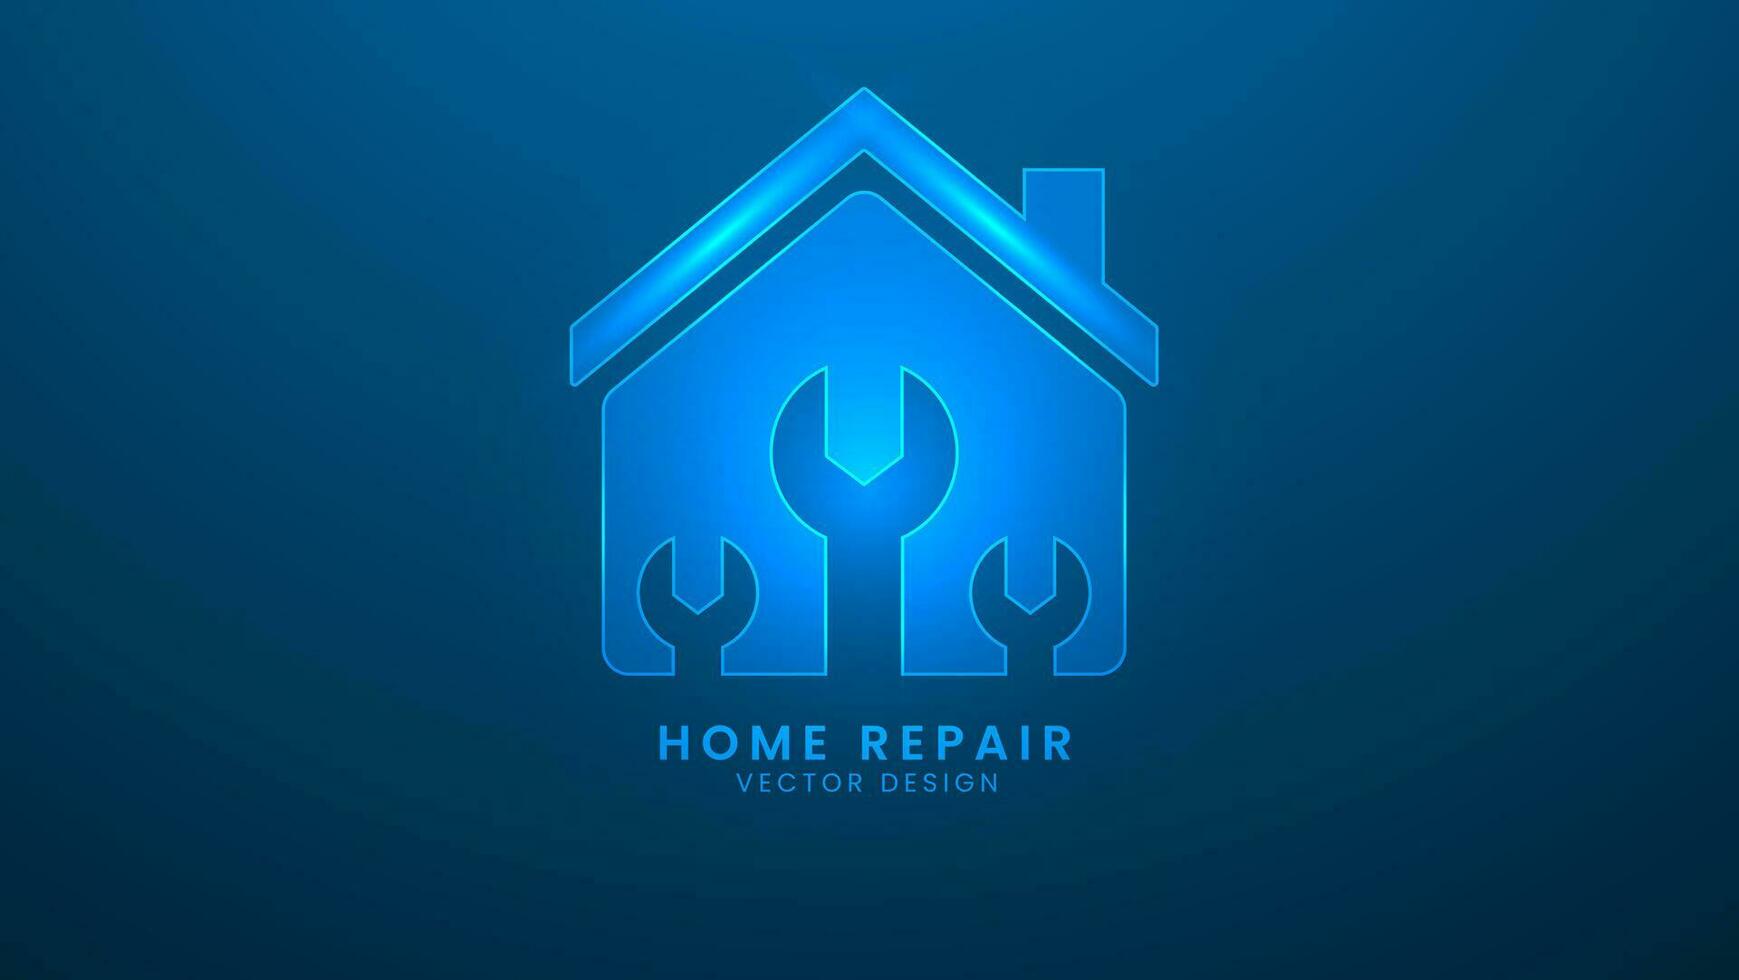 Home repair. Creative Home Construction. Vector illustration with light effect and neon